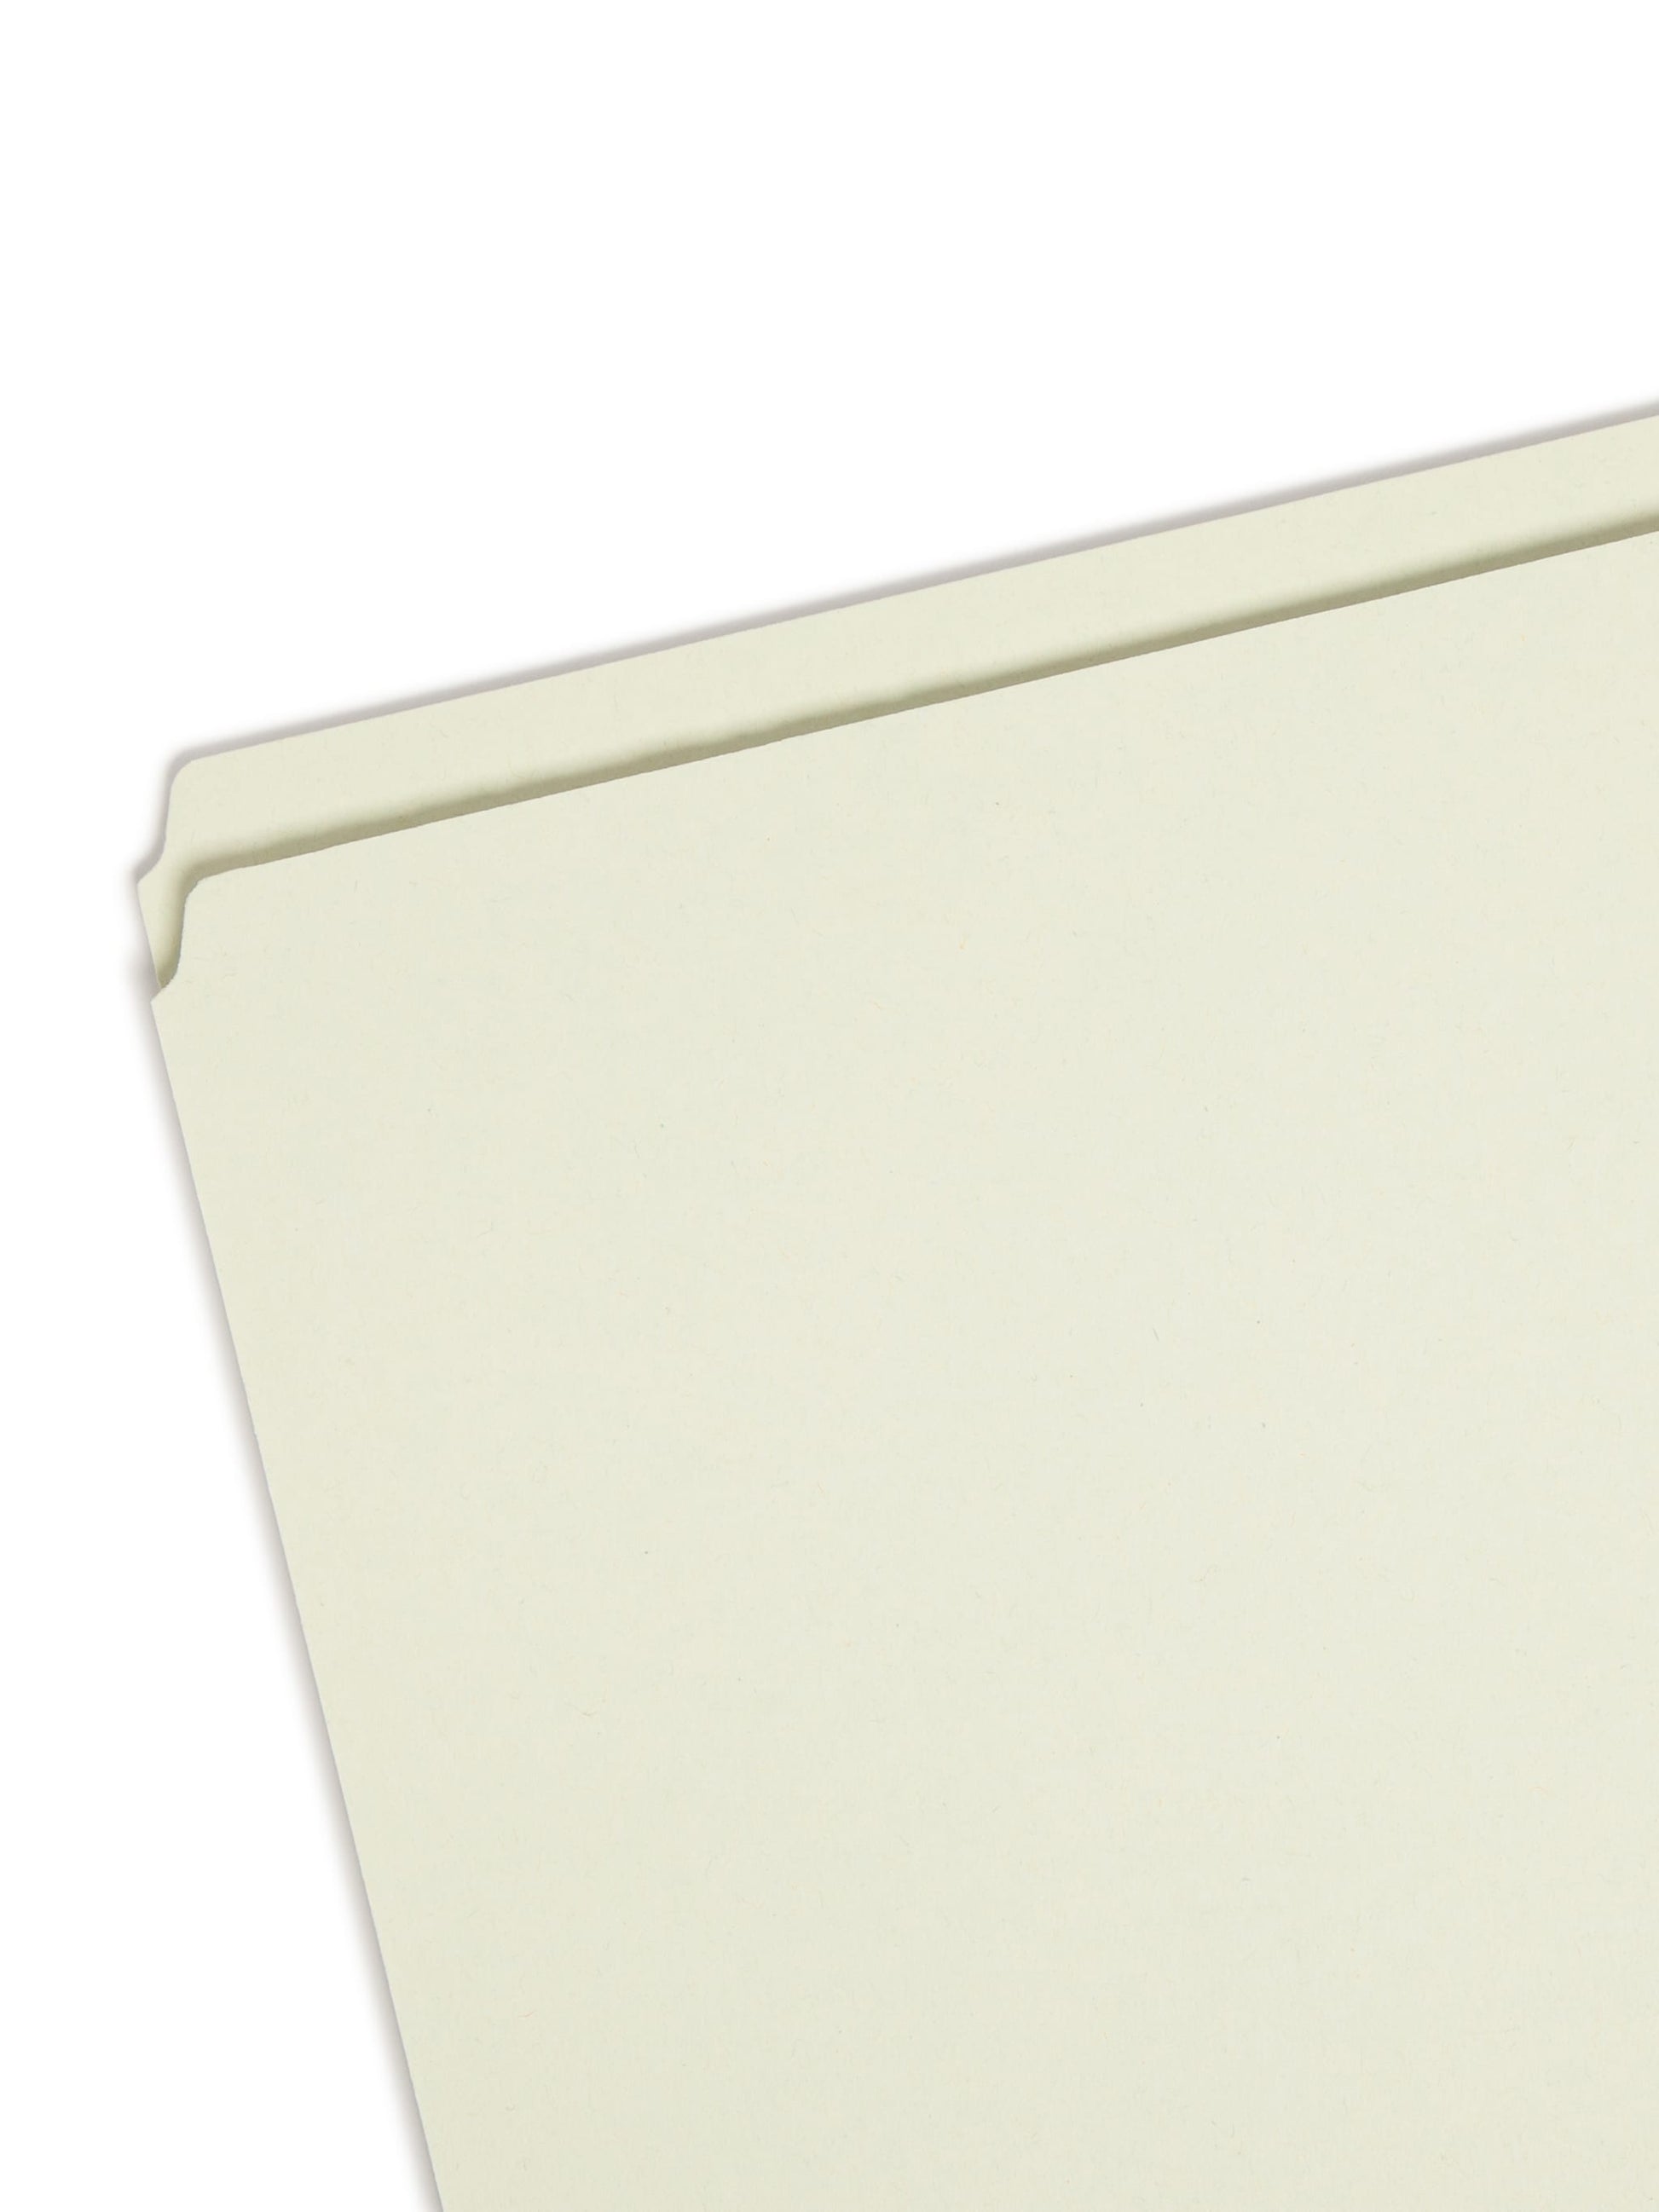 Pressboard File Folder, Straight-Cut Tab, 1 inch Expansion, Gray/Green Color, Letter Size, Set of 25, 086486132008